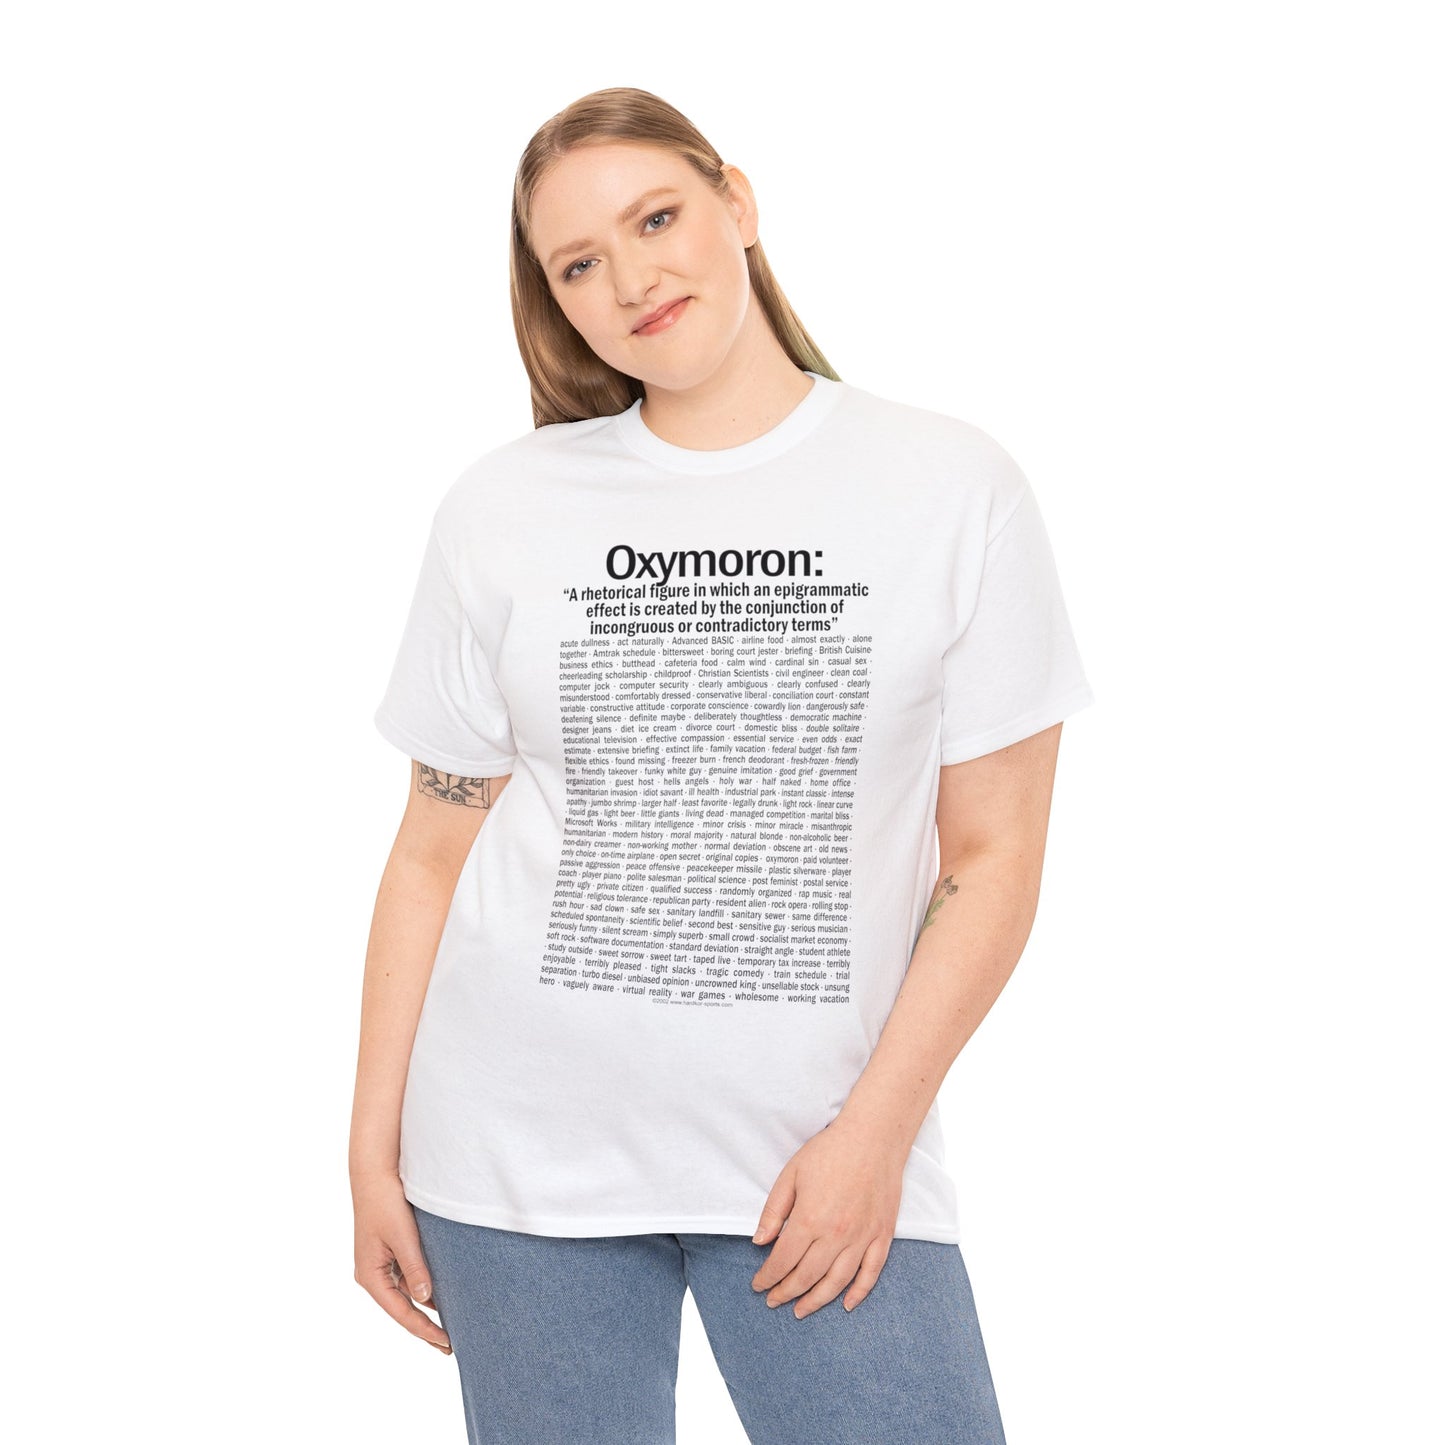 Oxymoron T-Shirts, Funny Oxymoron Saying, Government Intelligence, Clean Coal, Pretty Ugly and More, English Majors, Teacher T-shirts